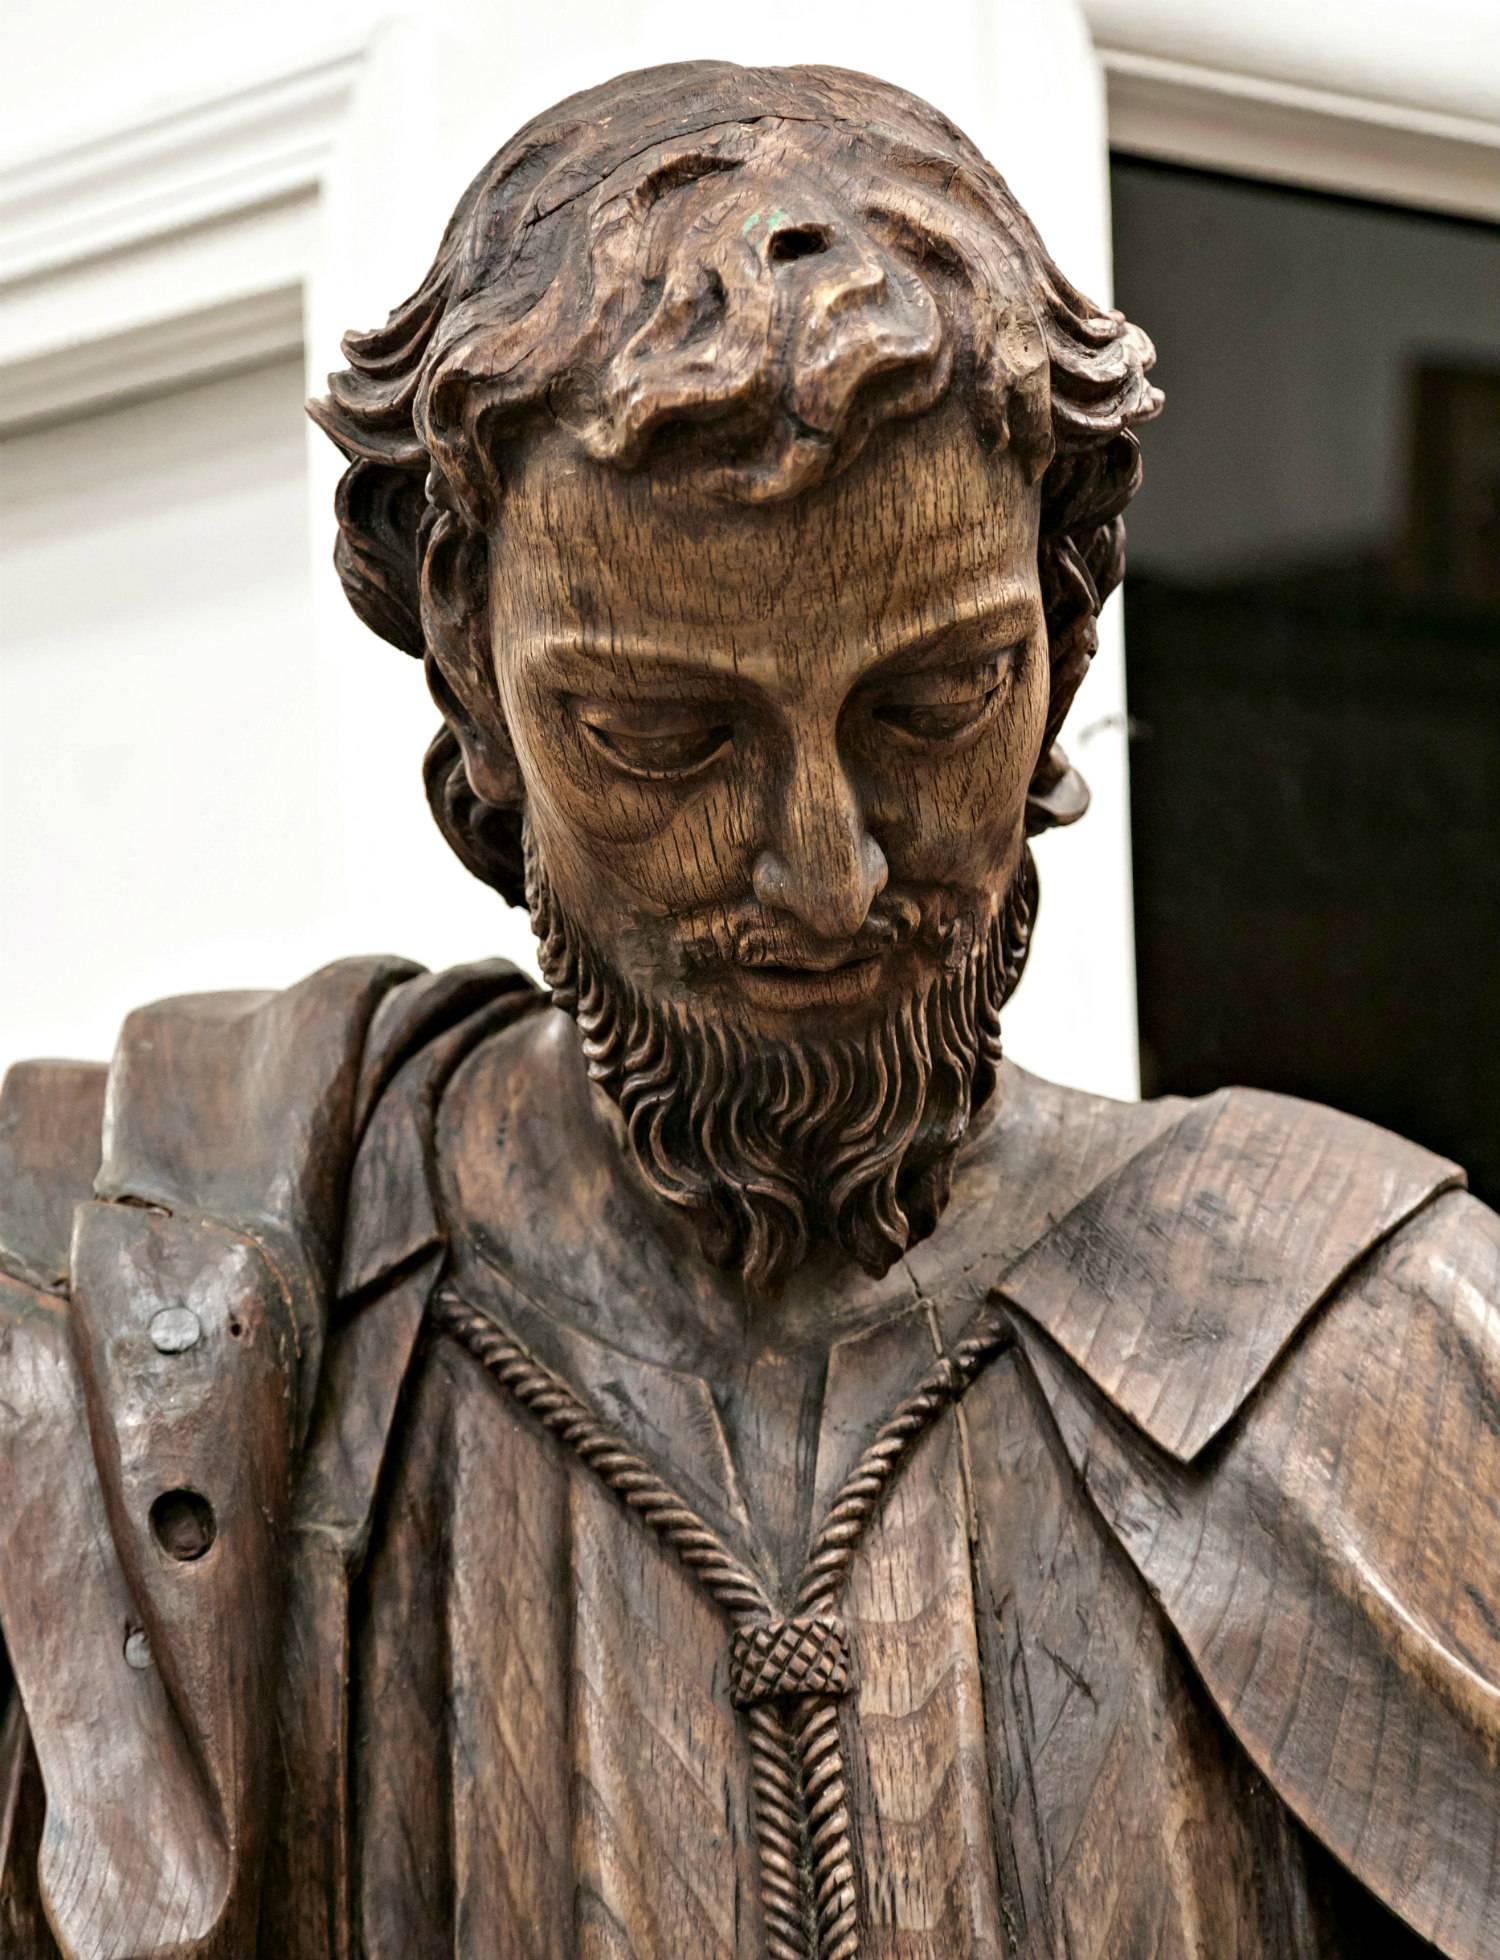 Magnificent wood statue of St. Joseph, hand-carved of solid oak with intricate draped cloths and a beautiful, lifelike facial expression. A rare and exquisite work of 18th century religious art, this life-size statue comes from a small village